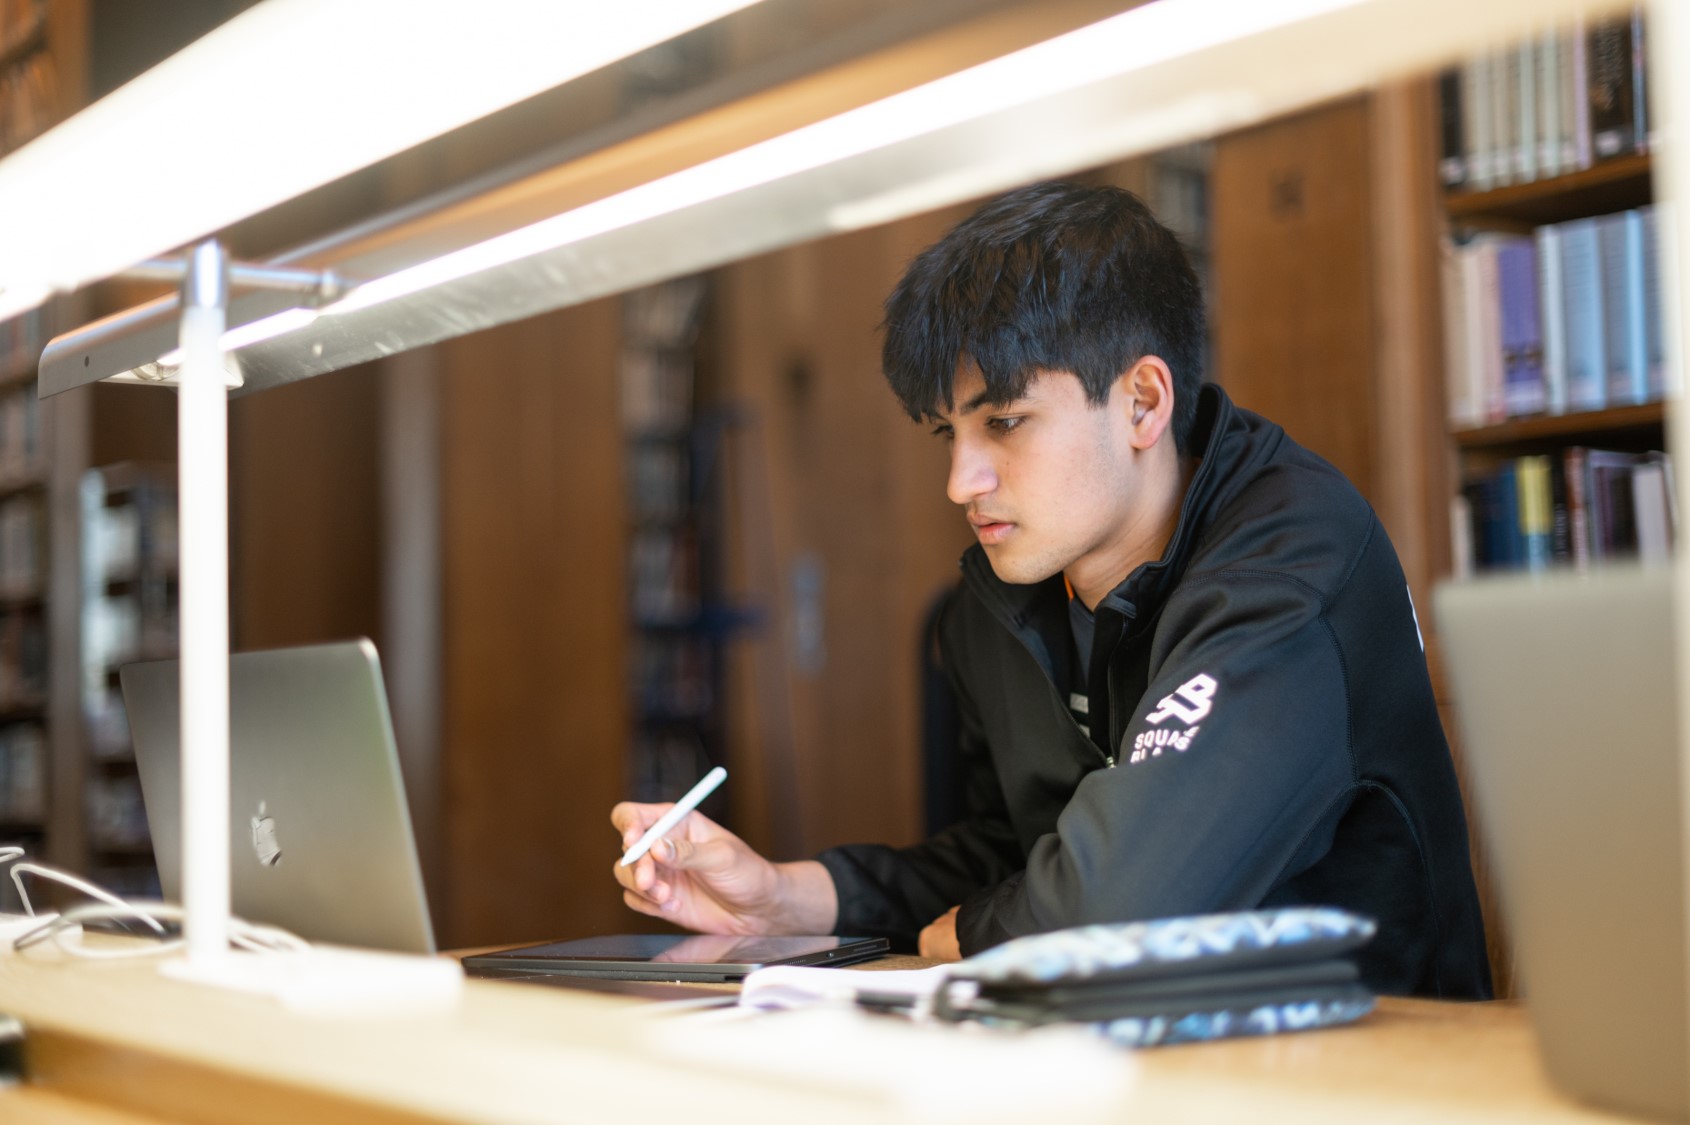 A student working in the library